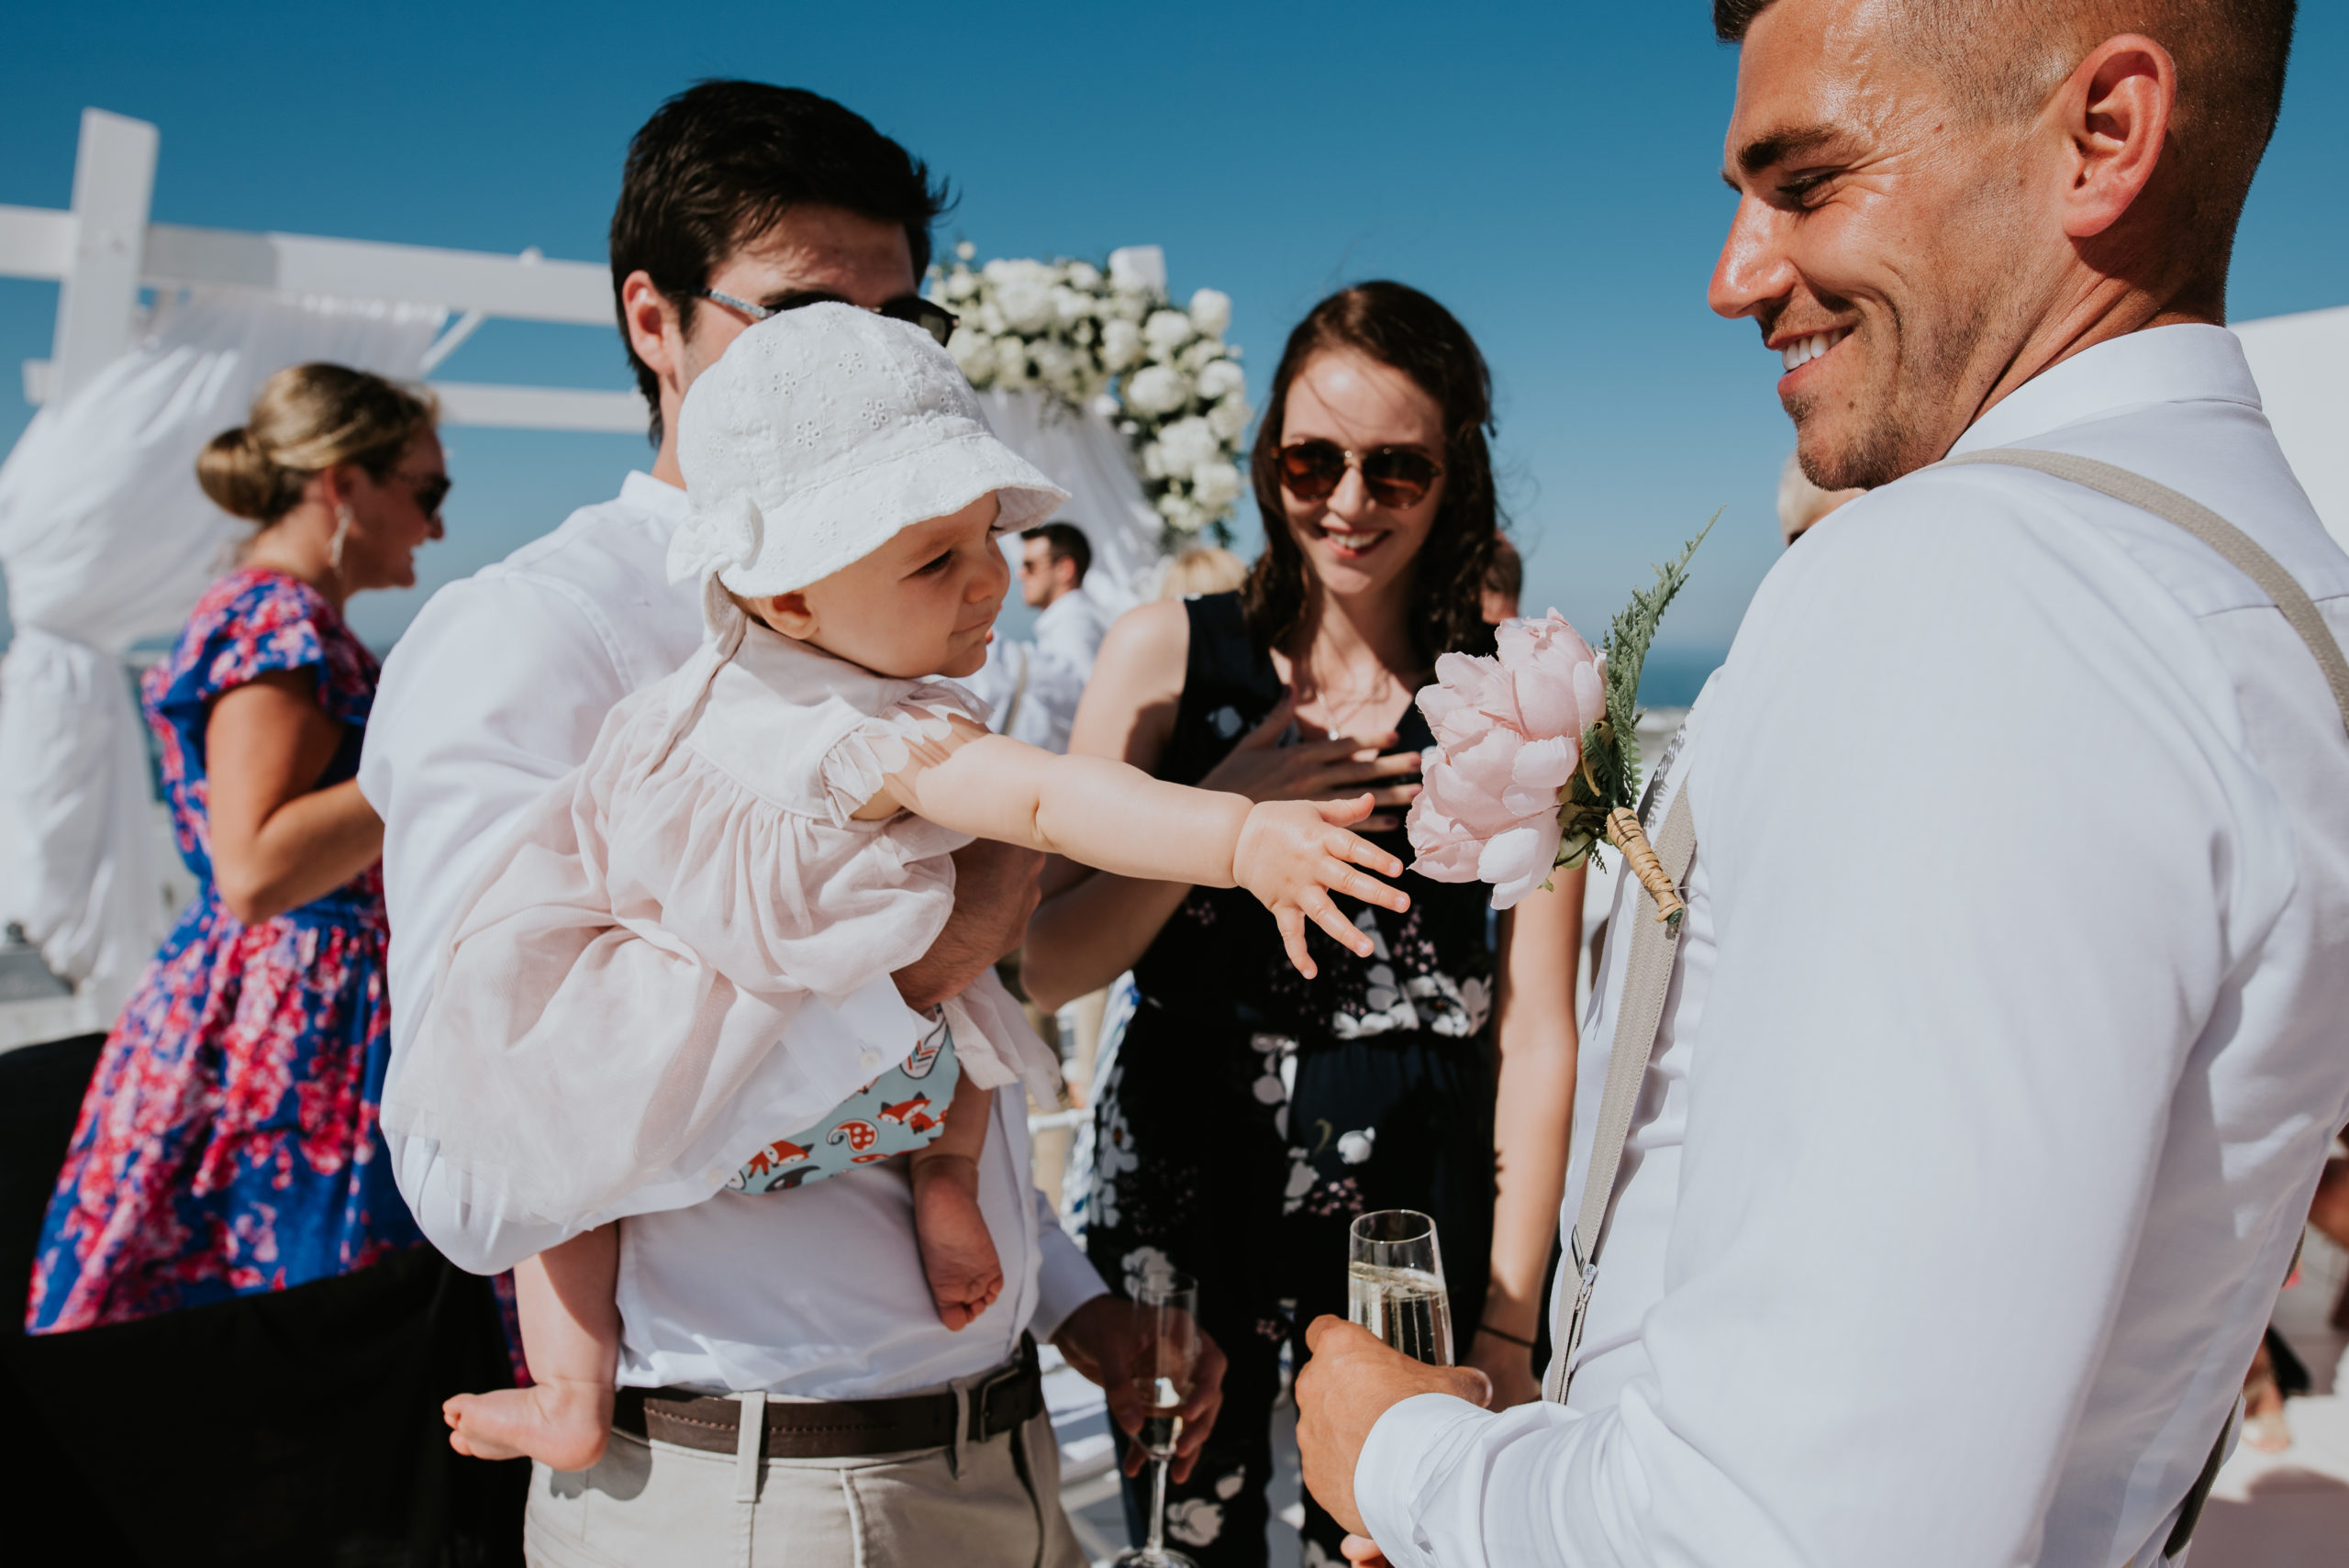 Wedding photographer Santorini:a cute baby reaches for groom's buttoner as he smiles by Ben and Vesna.